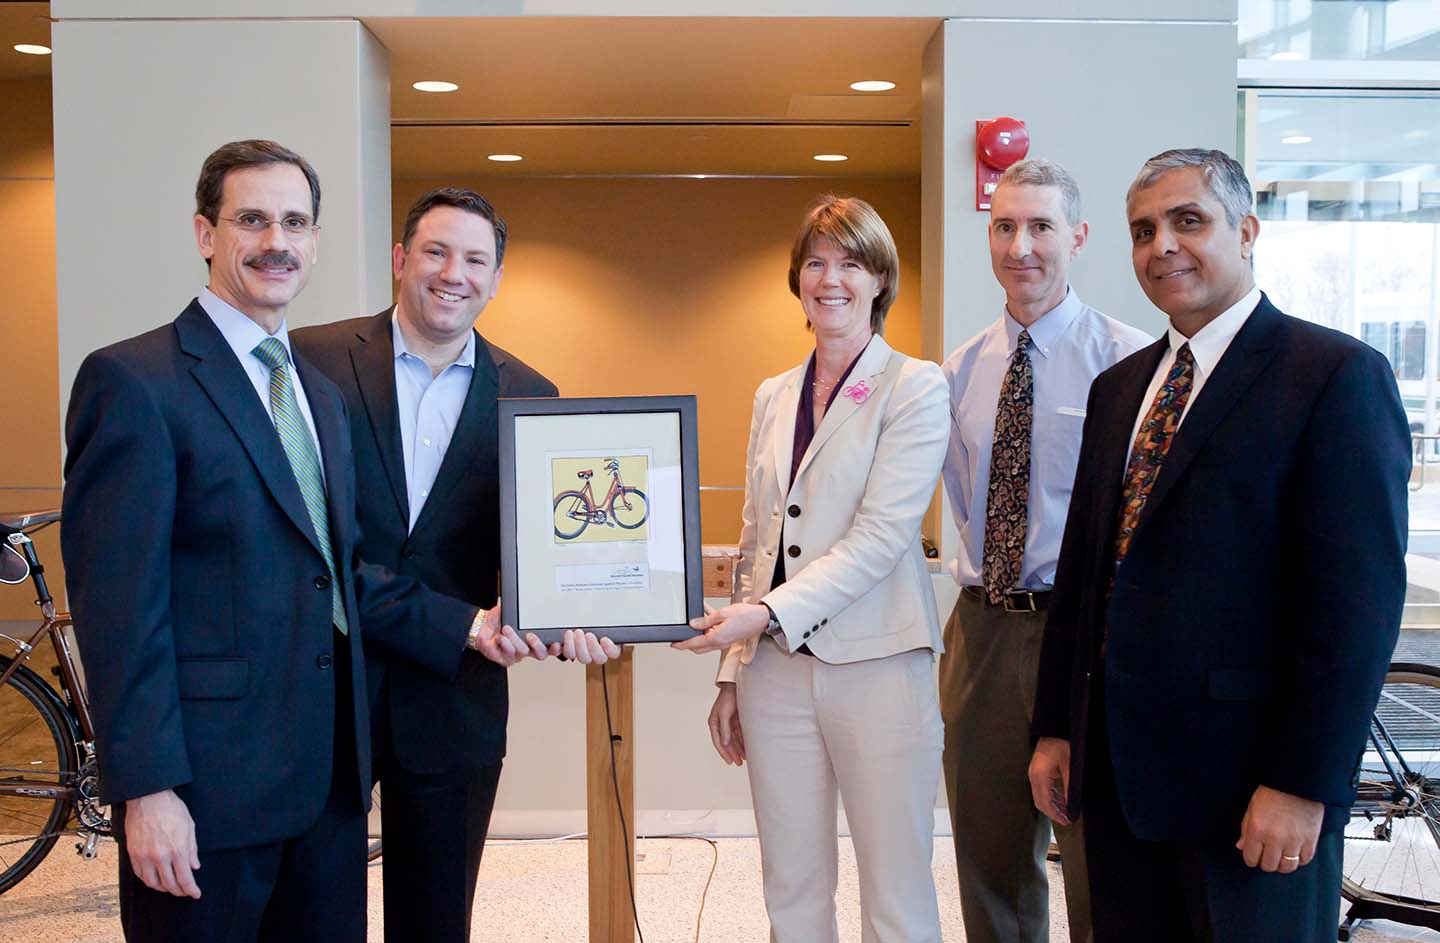 APL leaders pose with Bike Friendly Business Award